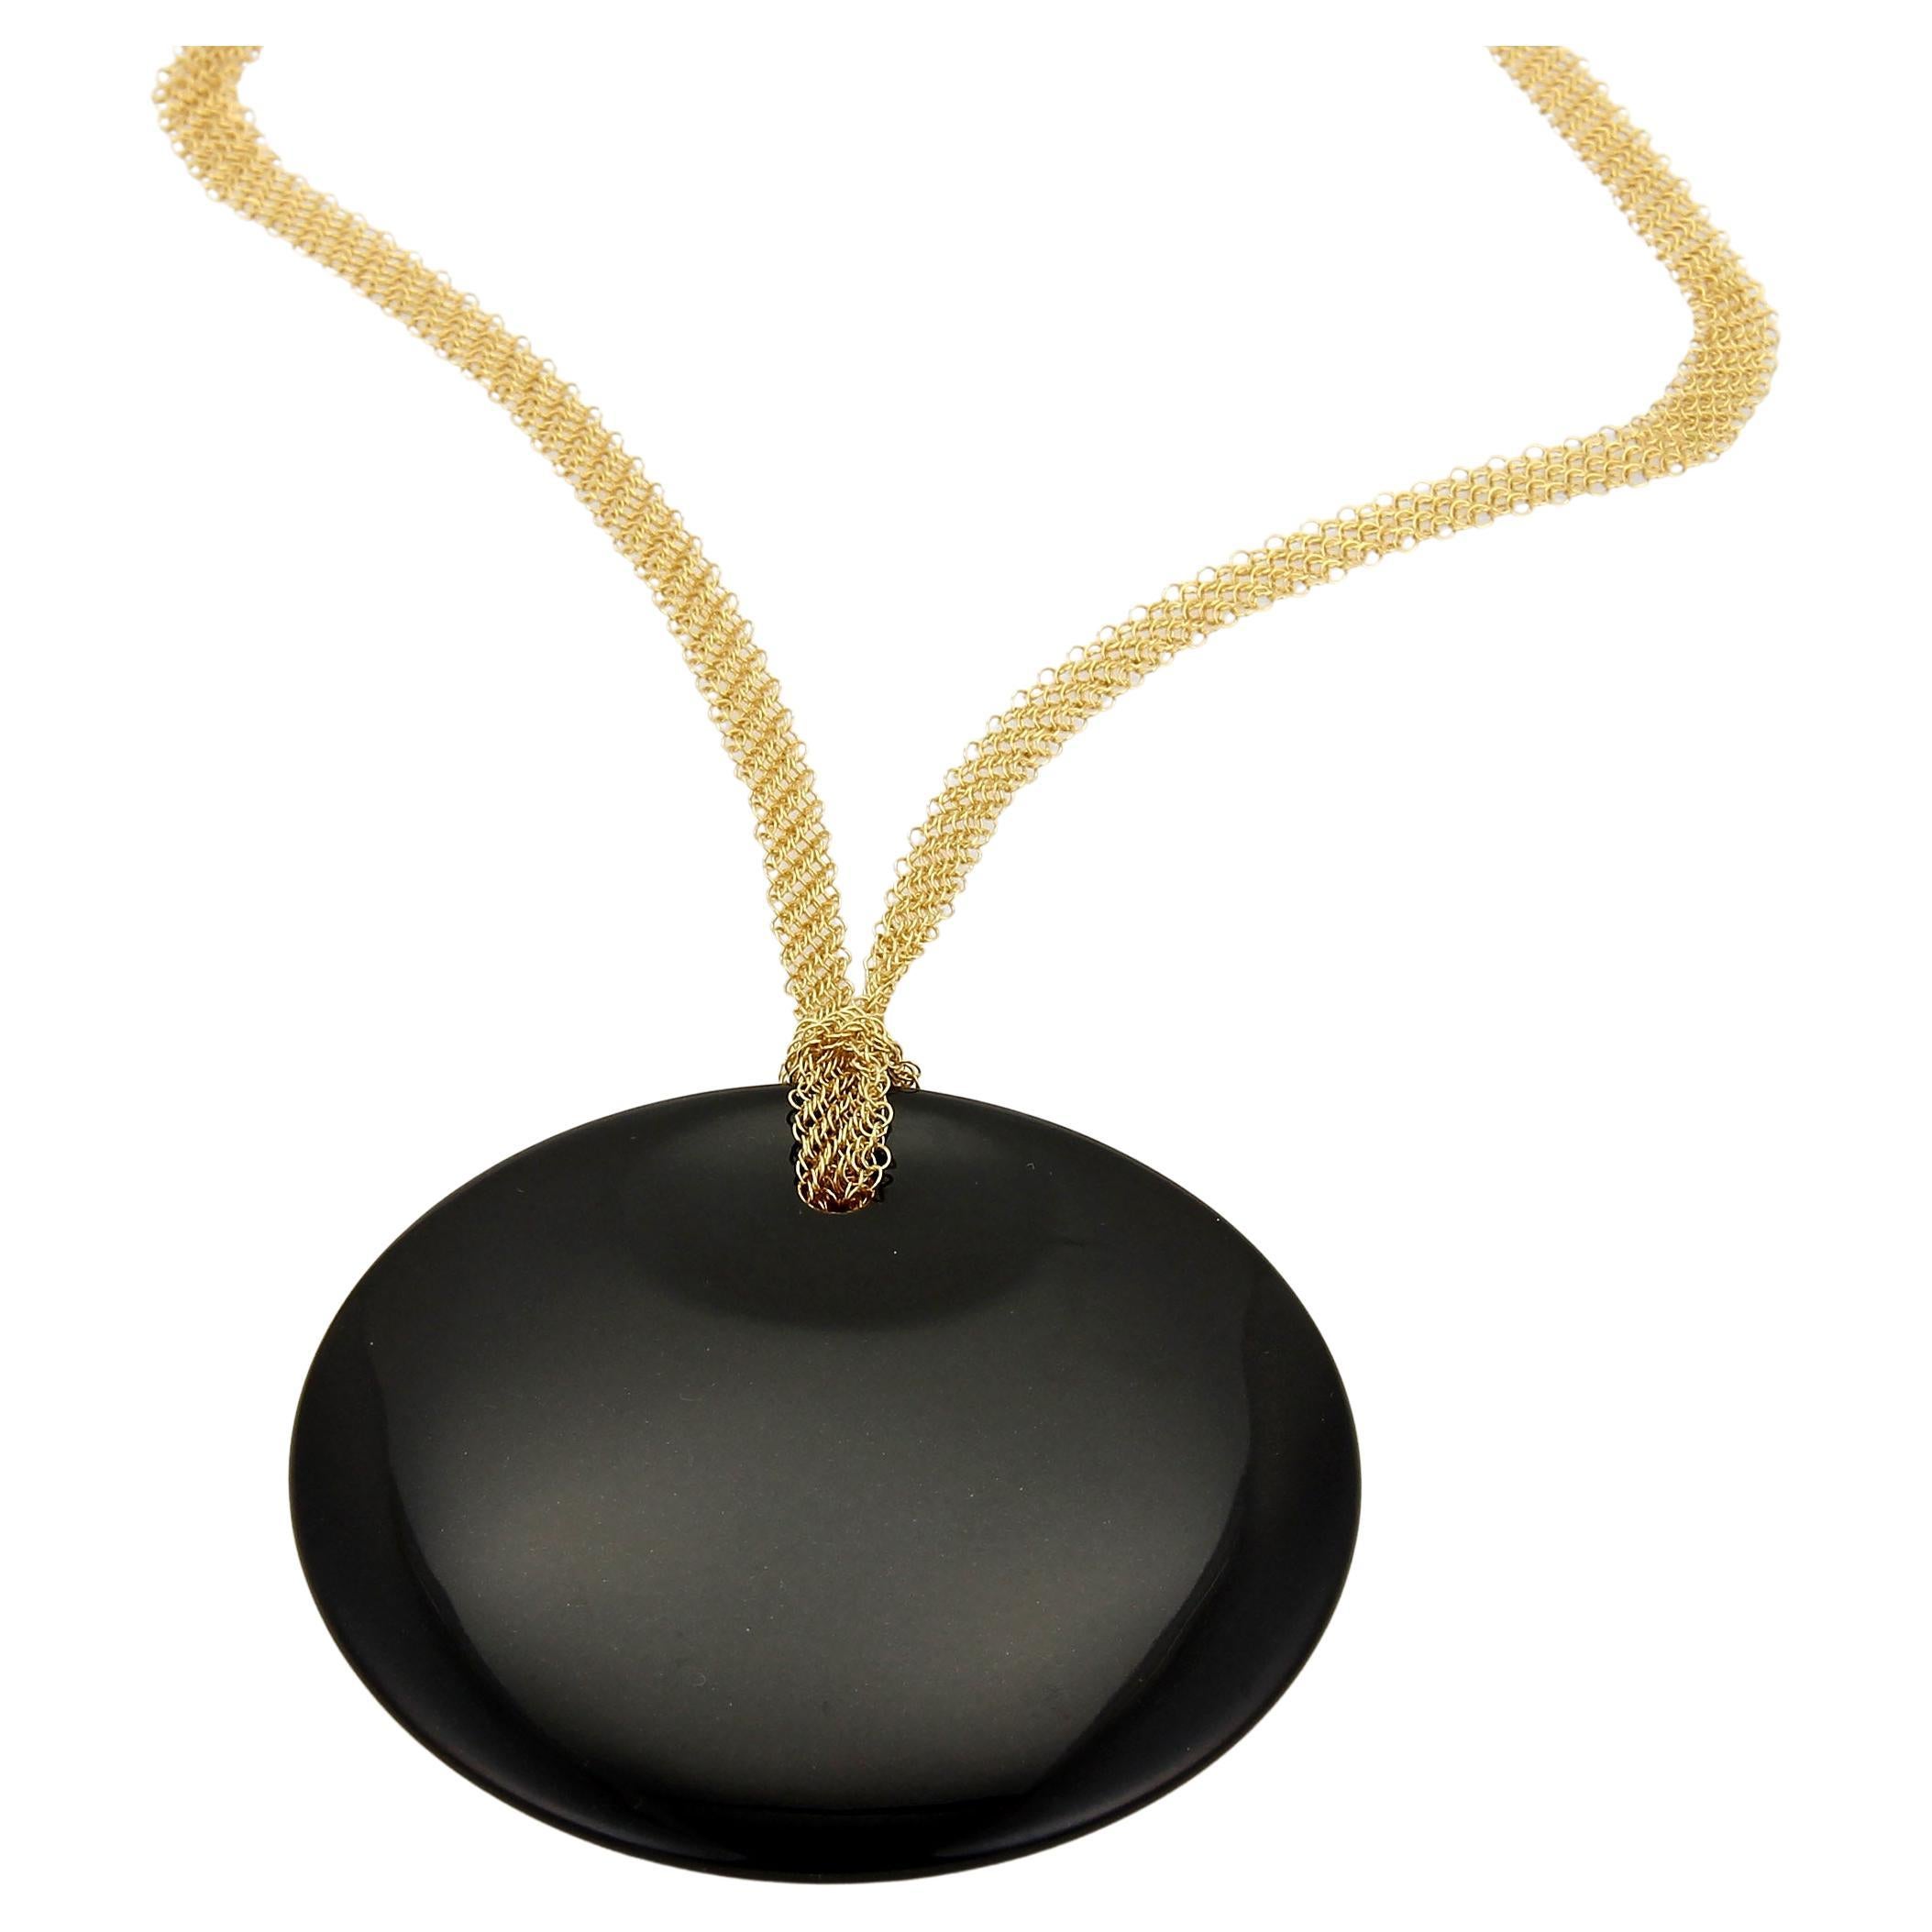 This is a gorgeous authentic pendant and mesh chain necklace from Tiffany & Co. by designer Elsa Peretti from her Round  collection, the pendant is crafted from black jade in the style of a large concave disc shape, it comes with a 5.5mm wide mesh